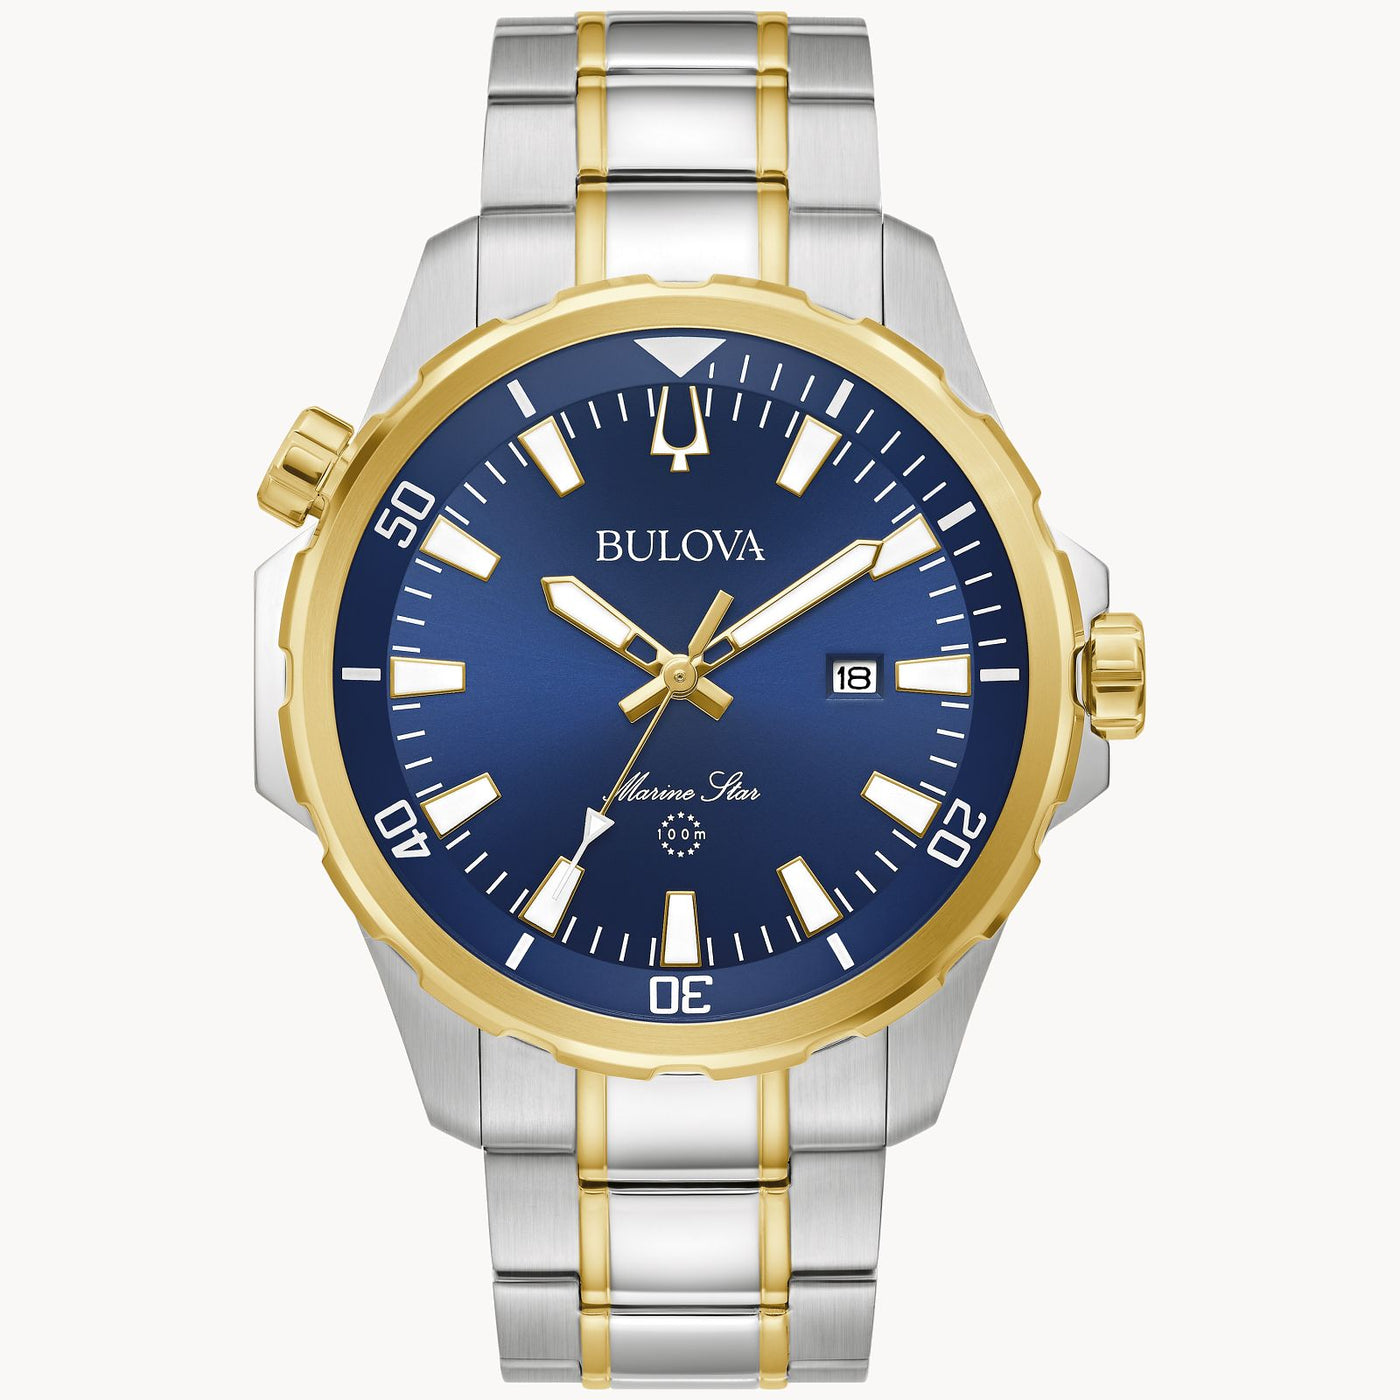 Gent's Two-Tone Bulova "Marine Star" with Blue Dial